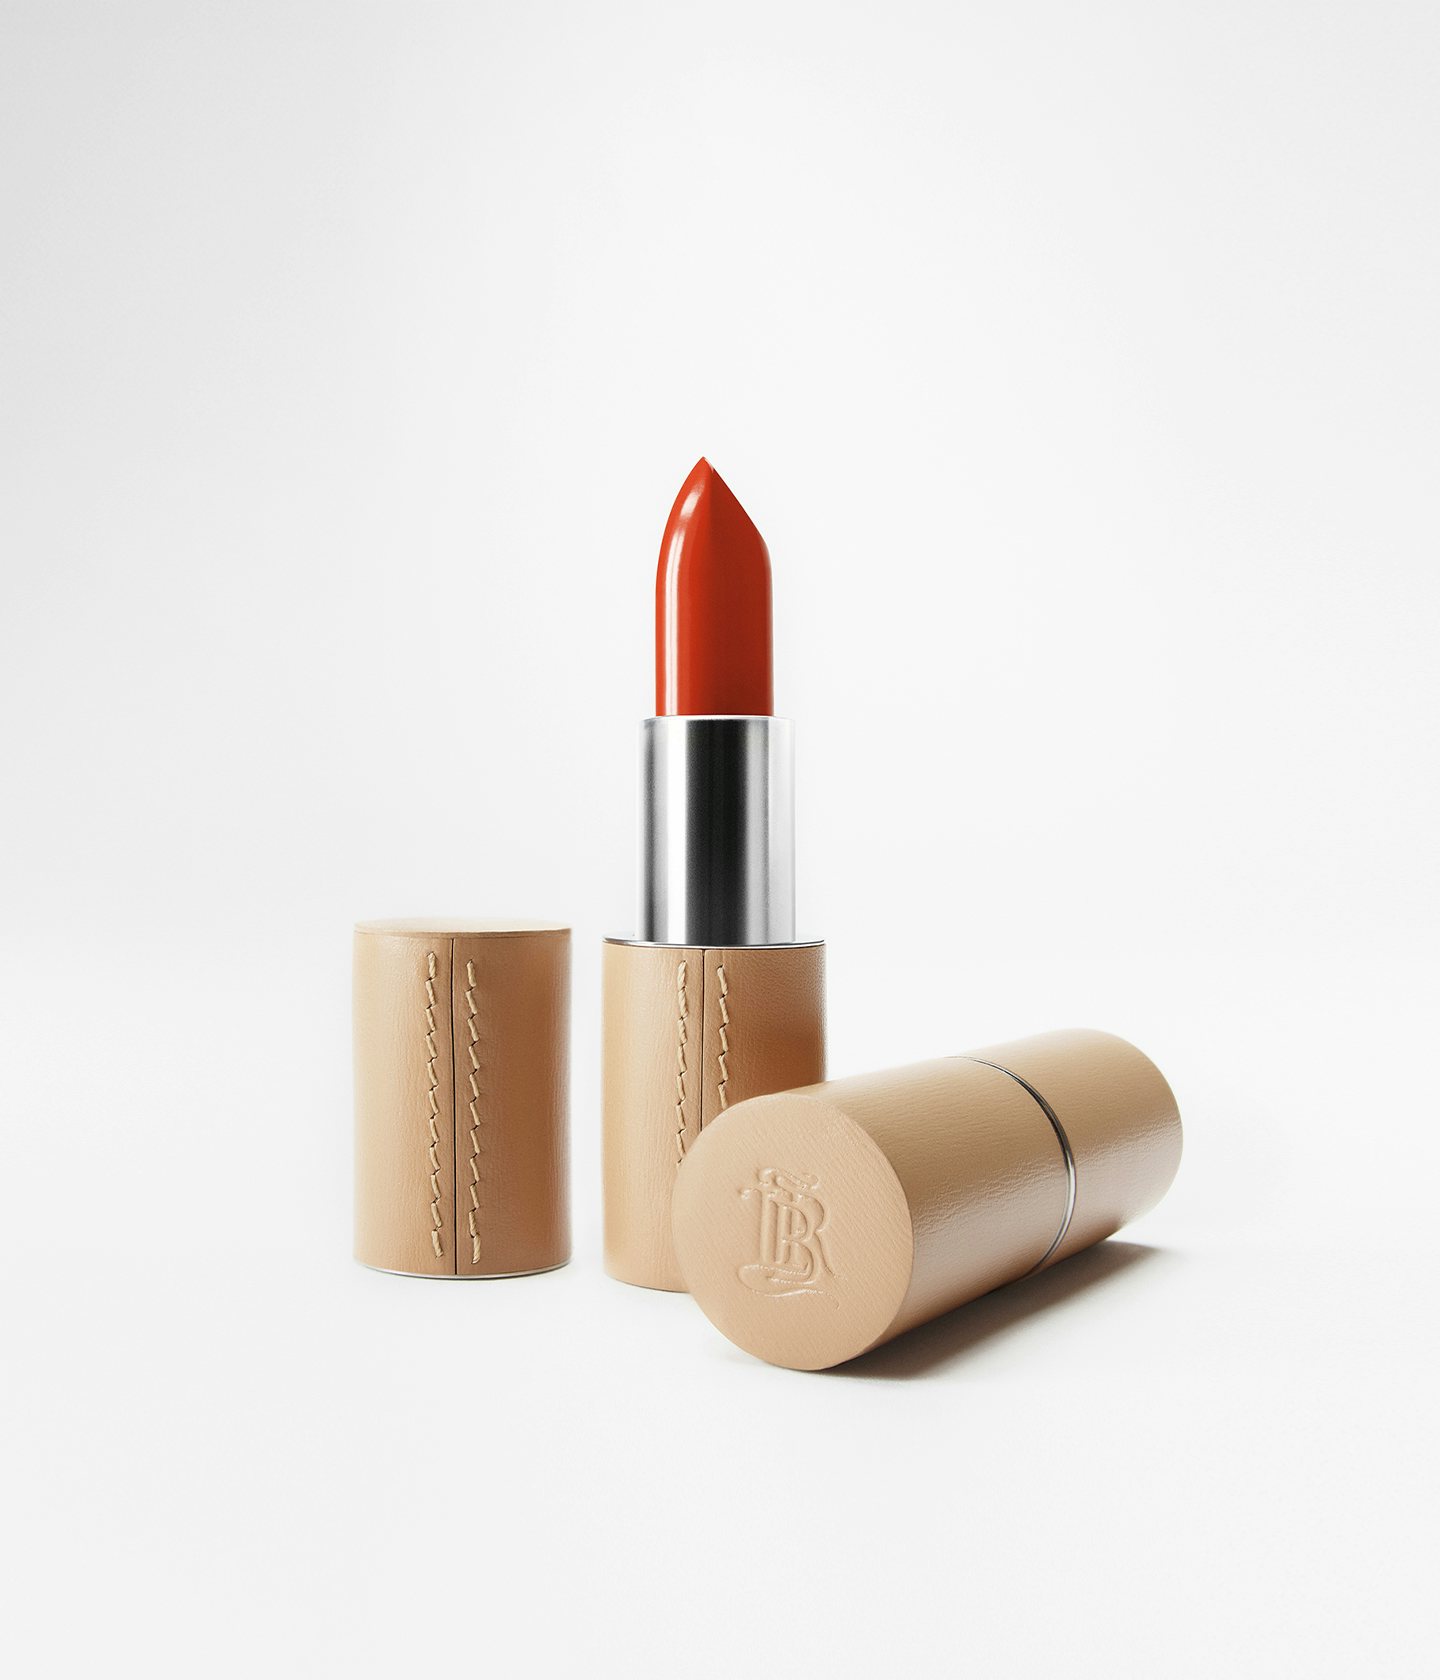 La bouche rouge Nude Red lipstick shade in the camel leather case 